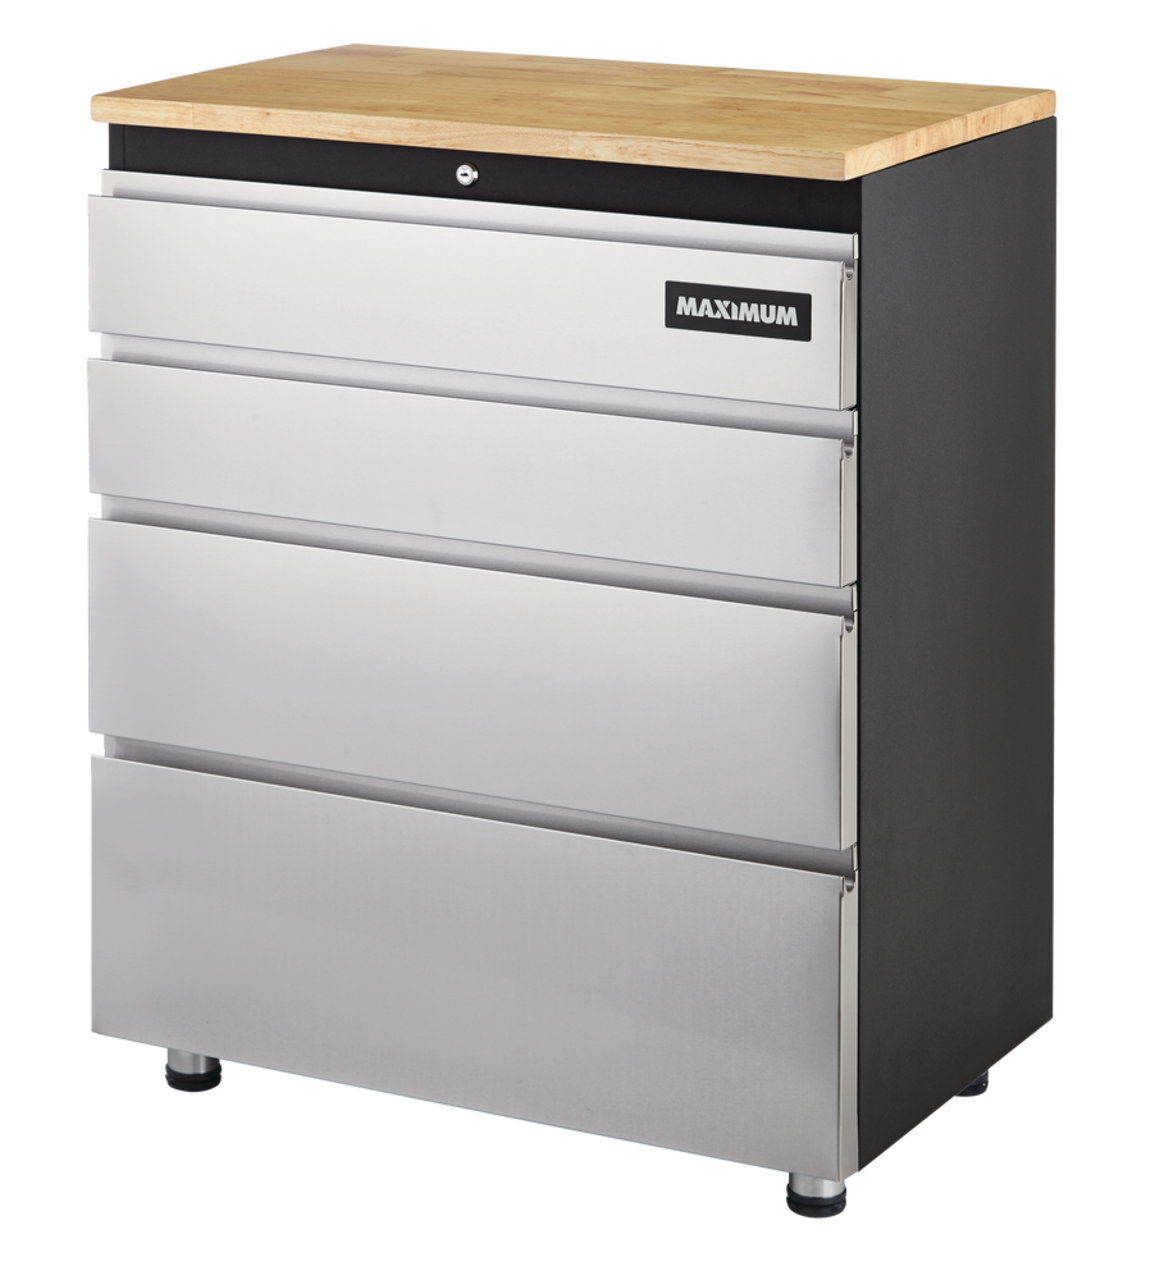 MAXIMUM Butcher Block Top Rolling Tool Storage Cabinet with 10 Drawers,  Stainless Steel, 56-in